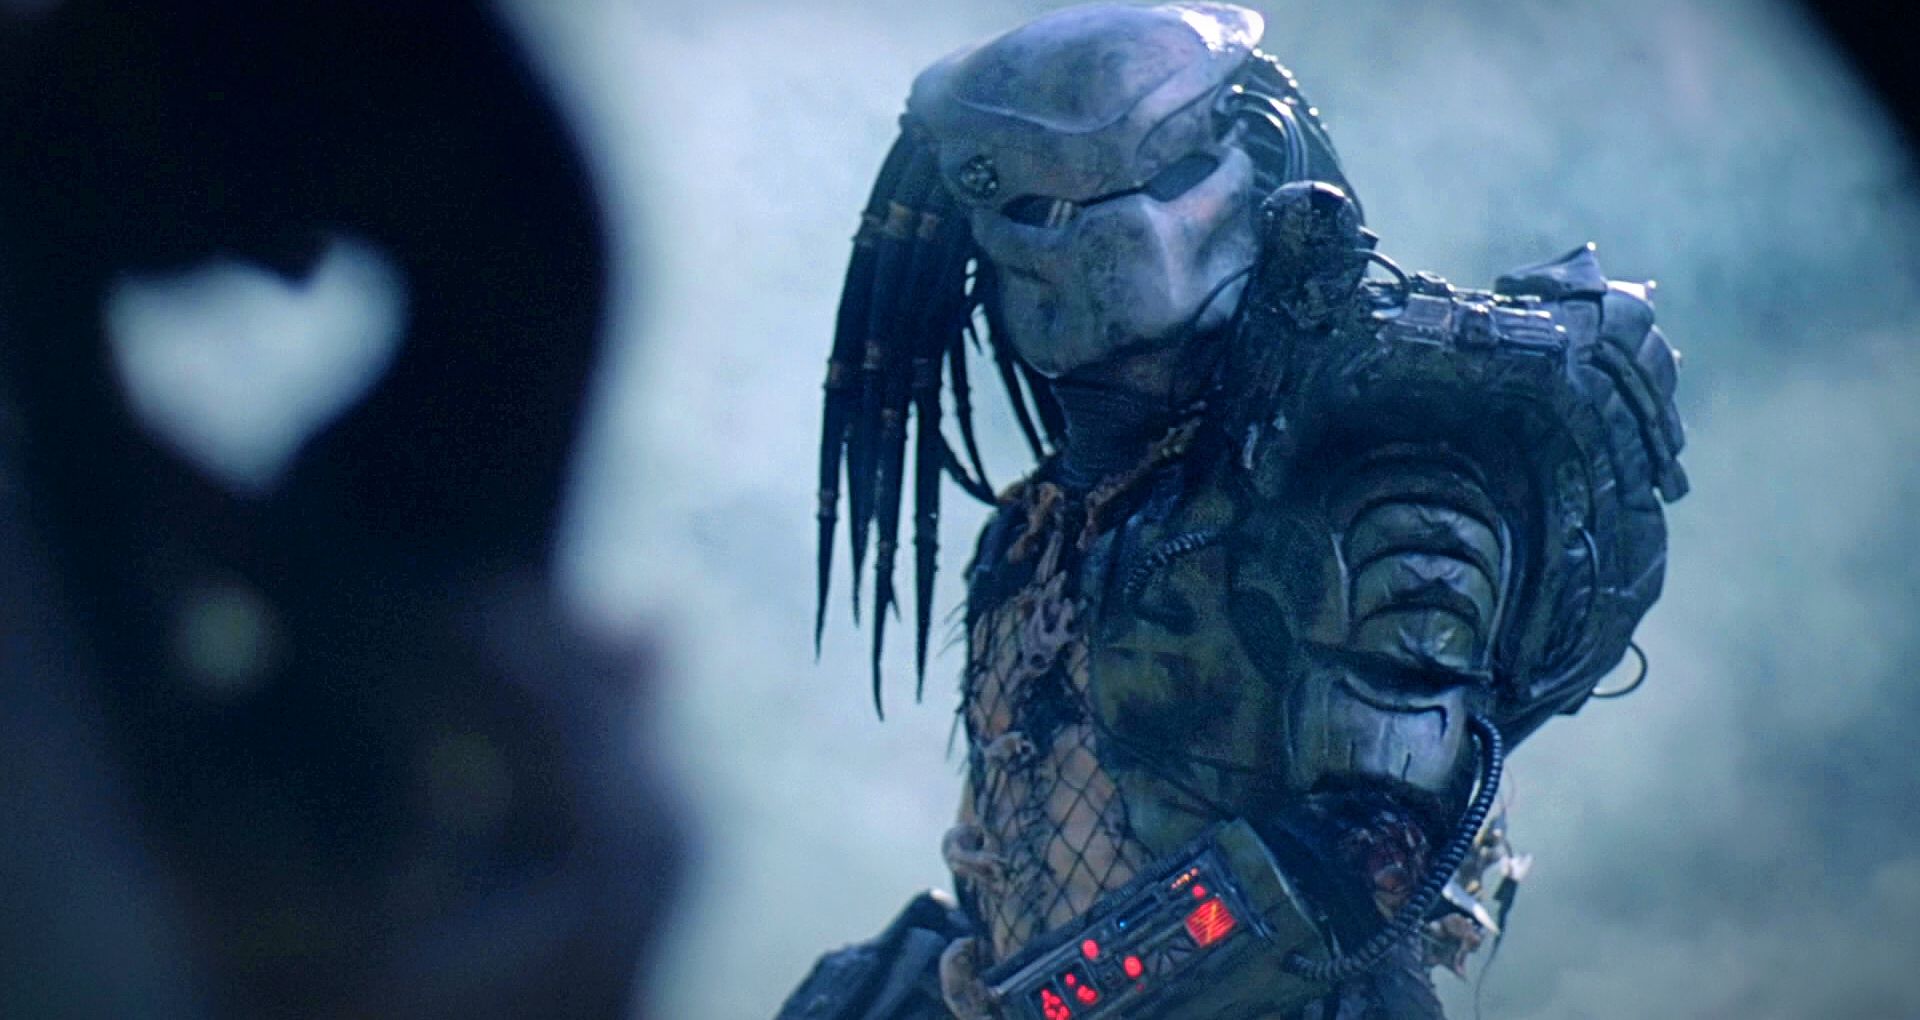 Kevin Peter Hall as the Predator from the 1987 film, Predator